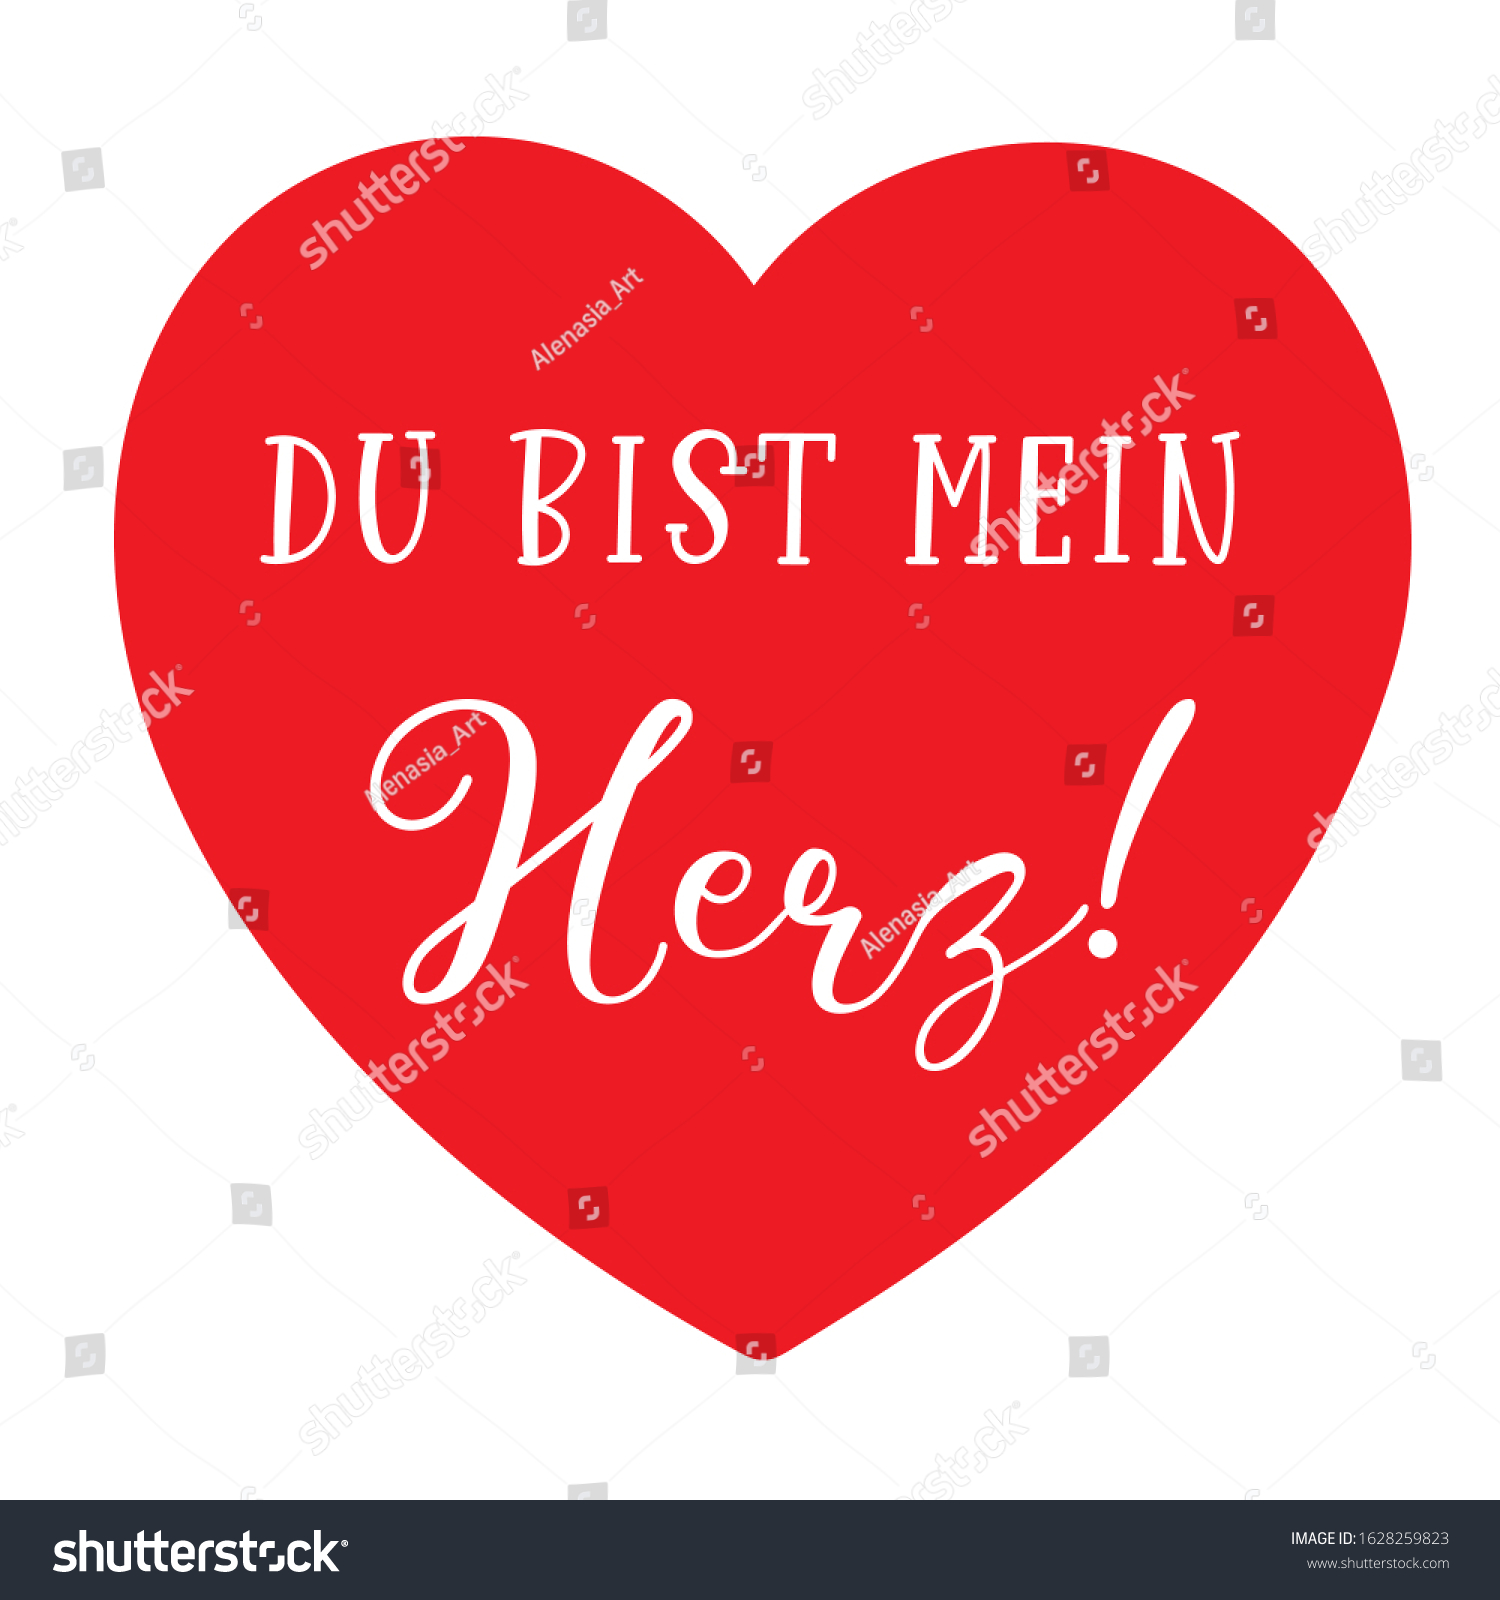 Hand Sketched Bist Mein German Quote Stock Vector Royalty Free